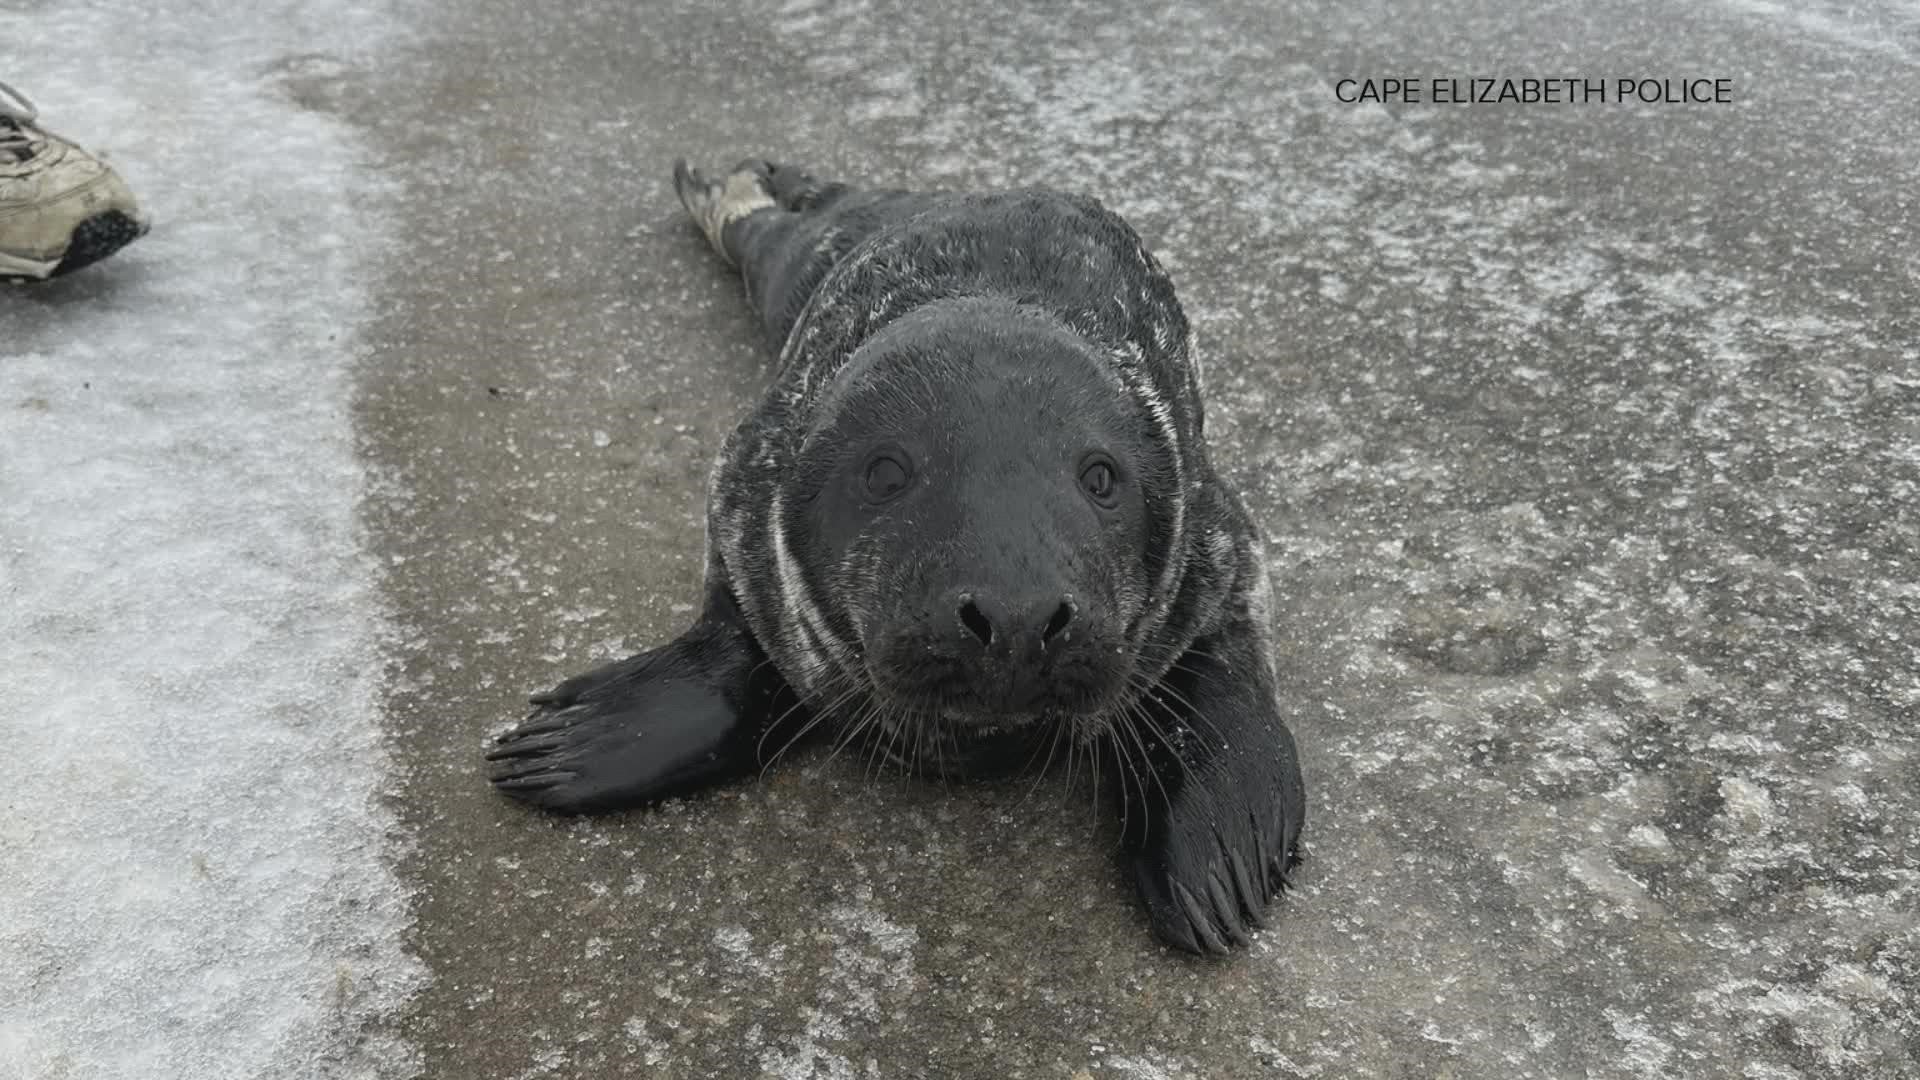 As the storm started to ramp up in Casco Bay, a curious and persistent visitor came calling. The seal is now being cared for by the Marine Mammals of Maine.